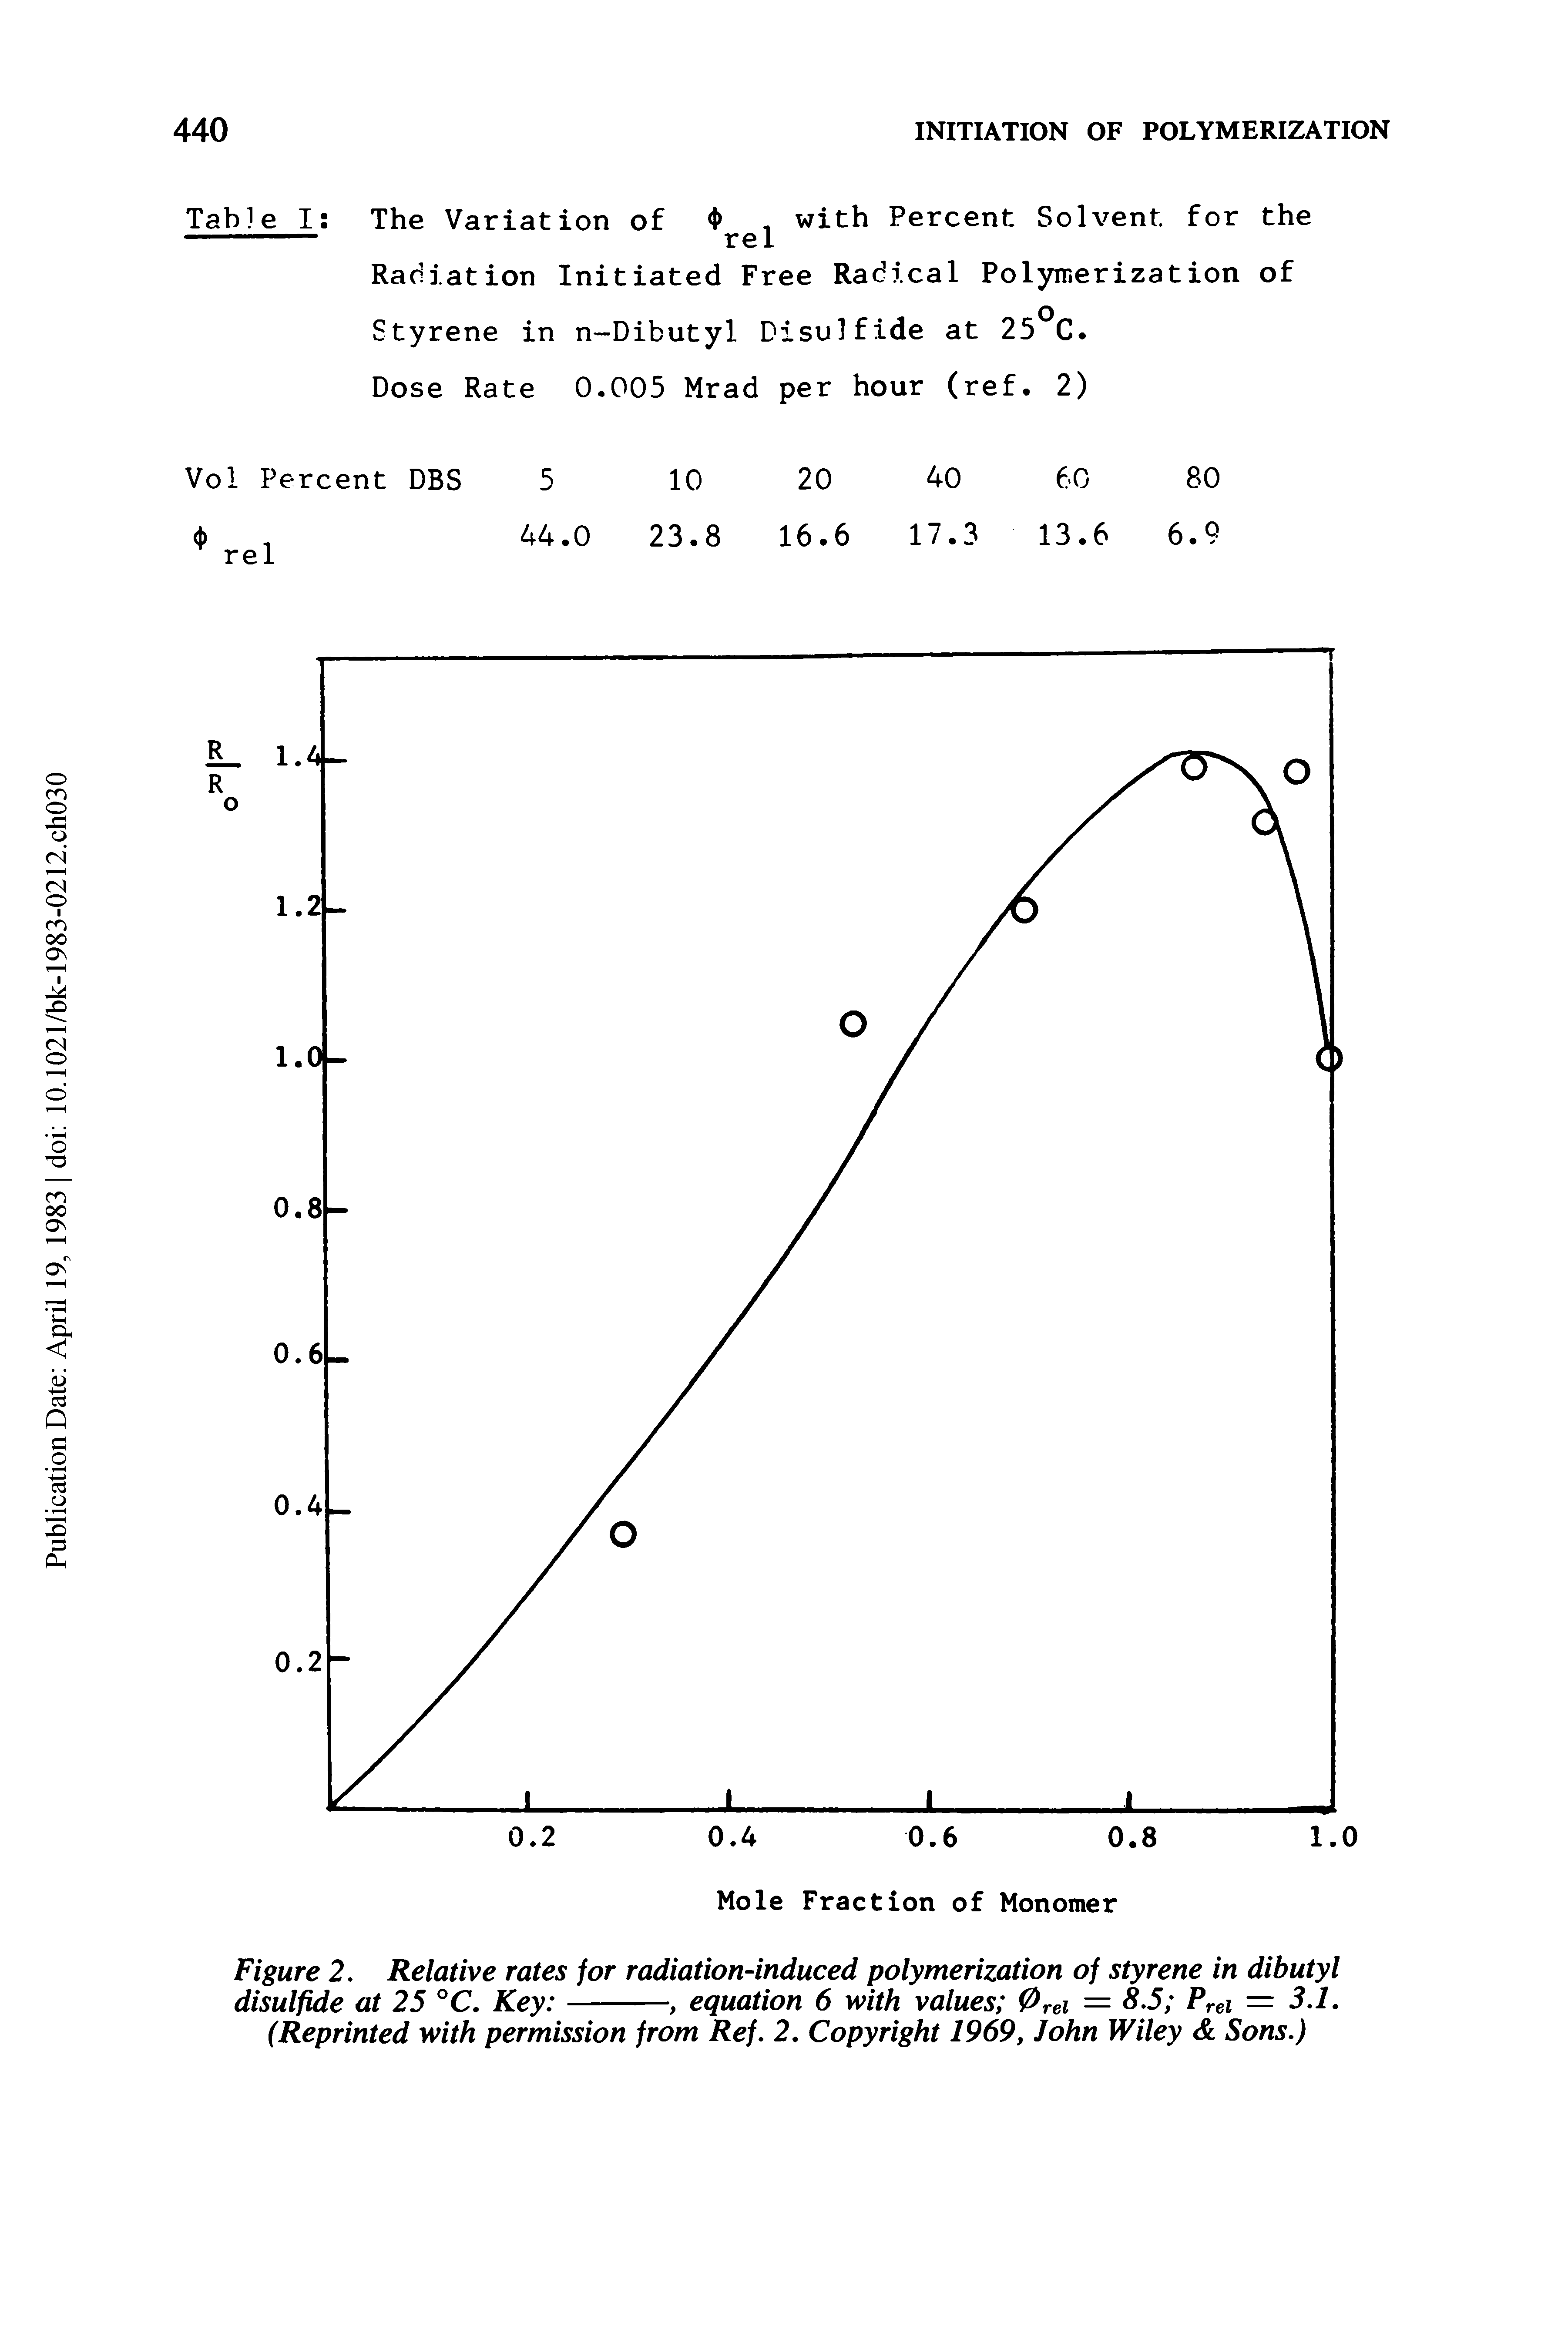 Figure 2. Relative rates for radiation-induced polymerization of styrene in dibutyl...